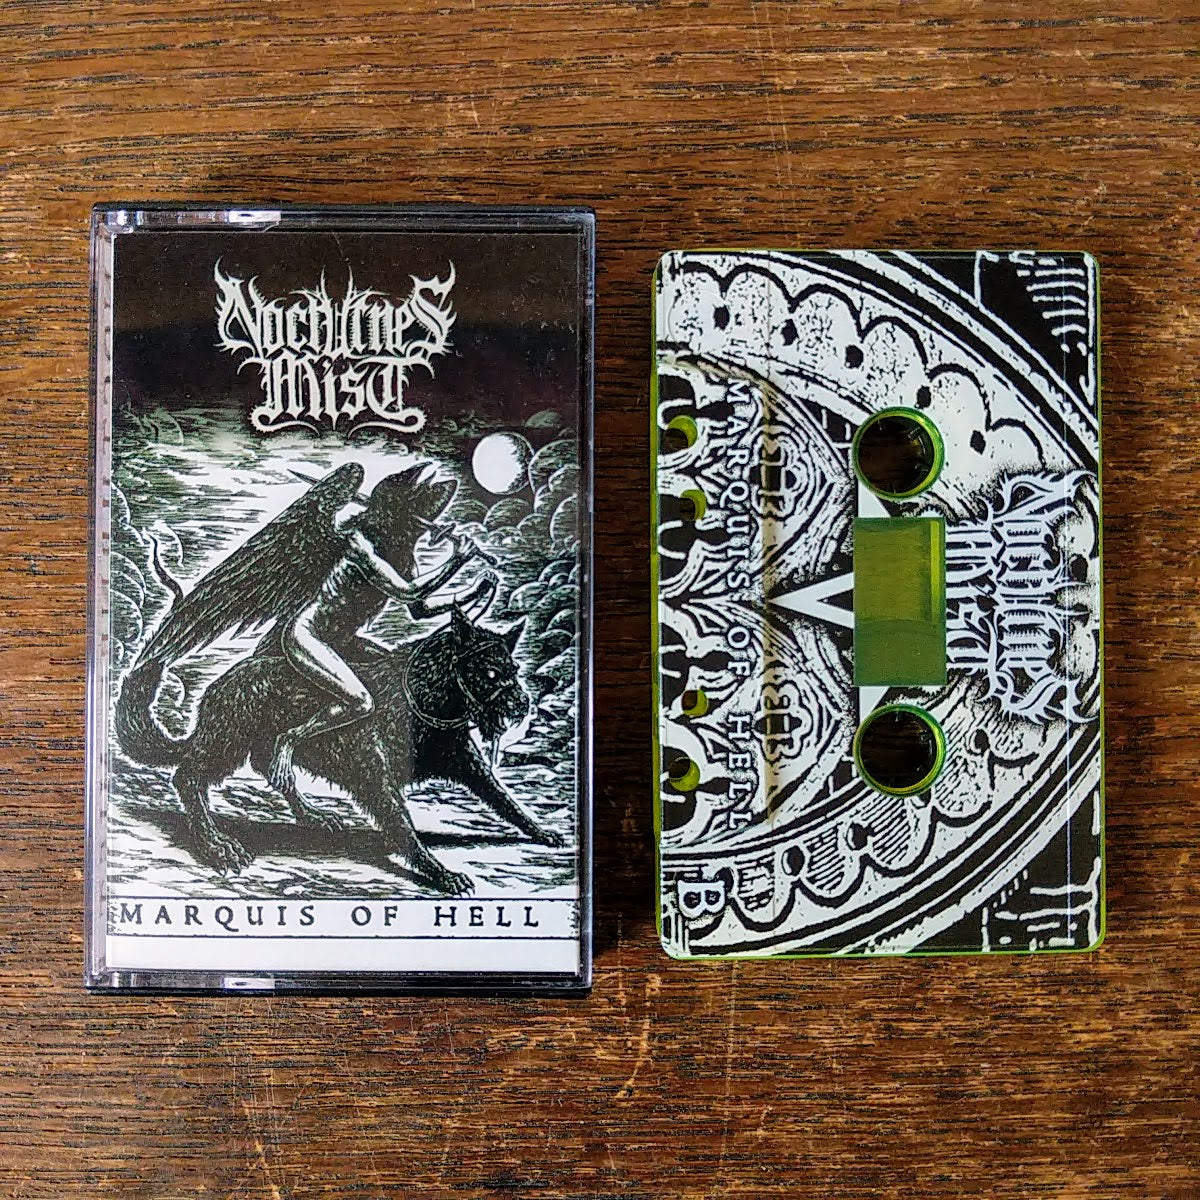 [SOLD OUT] NOCTURNES MIST "Marquis of Hell" Cassette Tape